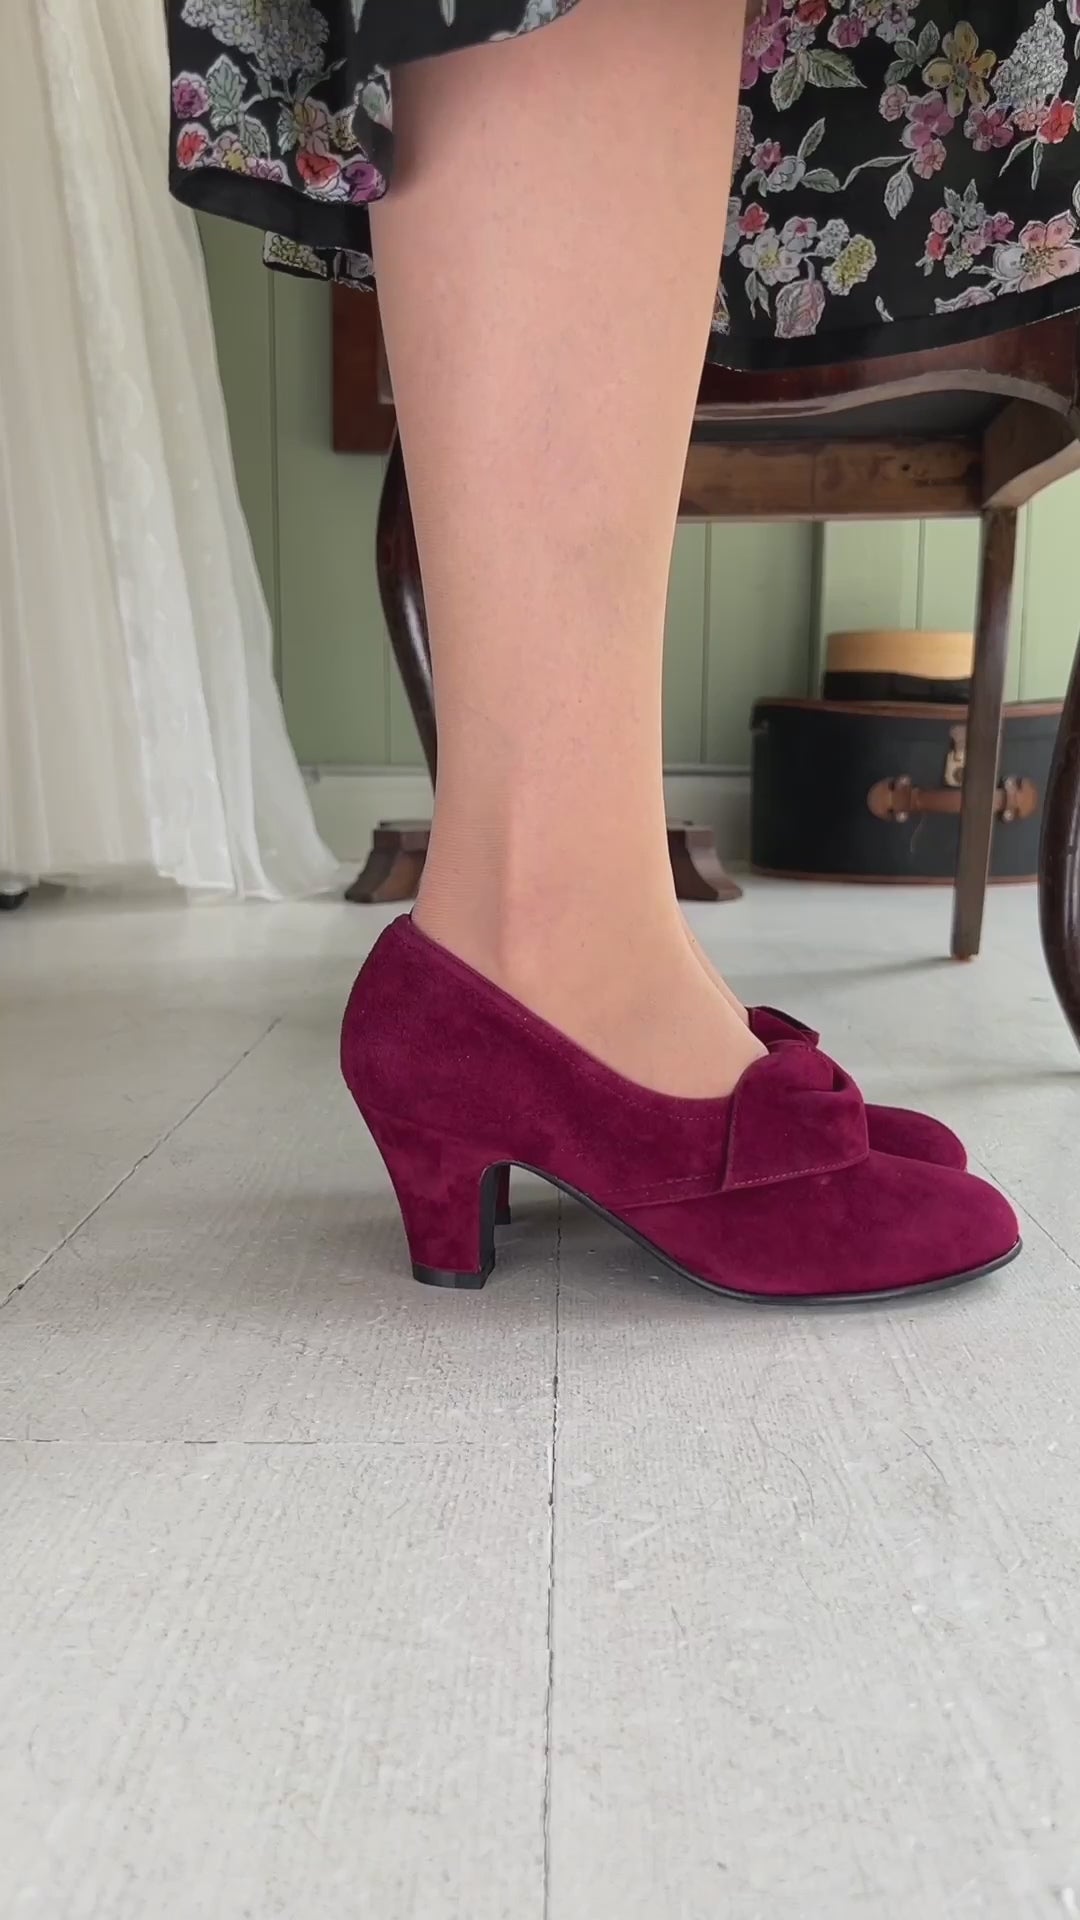 40's vintage style pumps in suede with rosette - Burgundy red - Luise